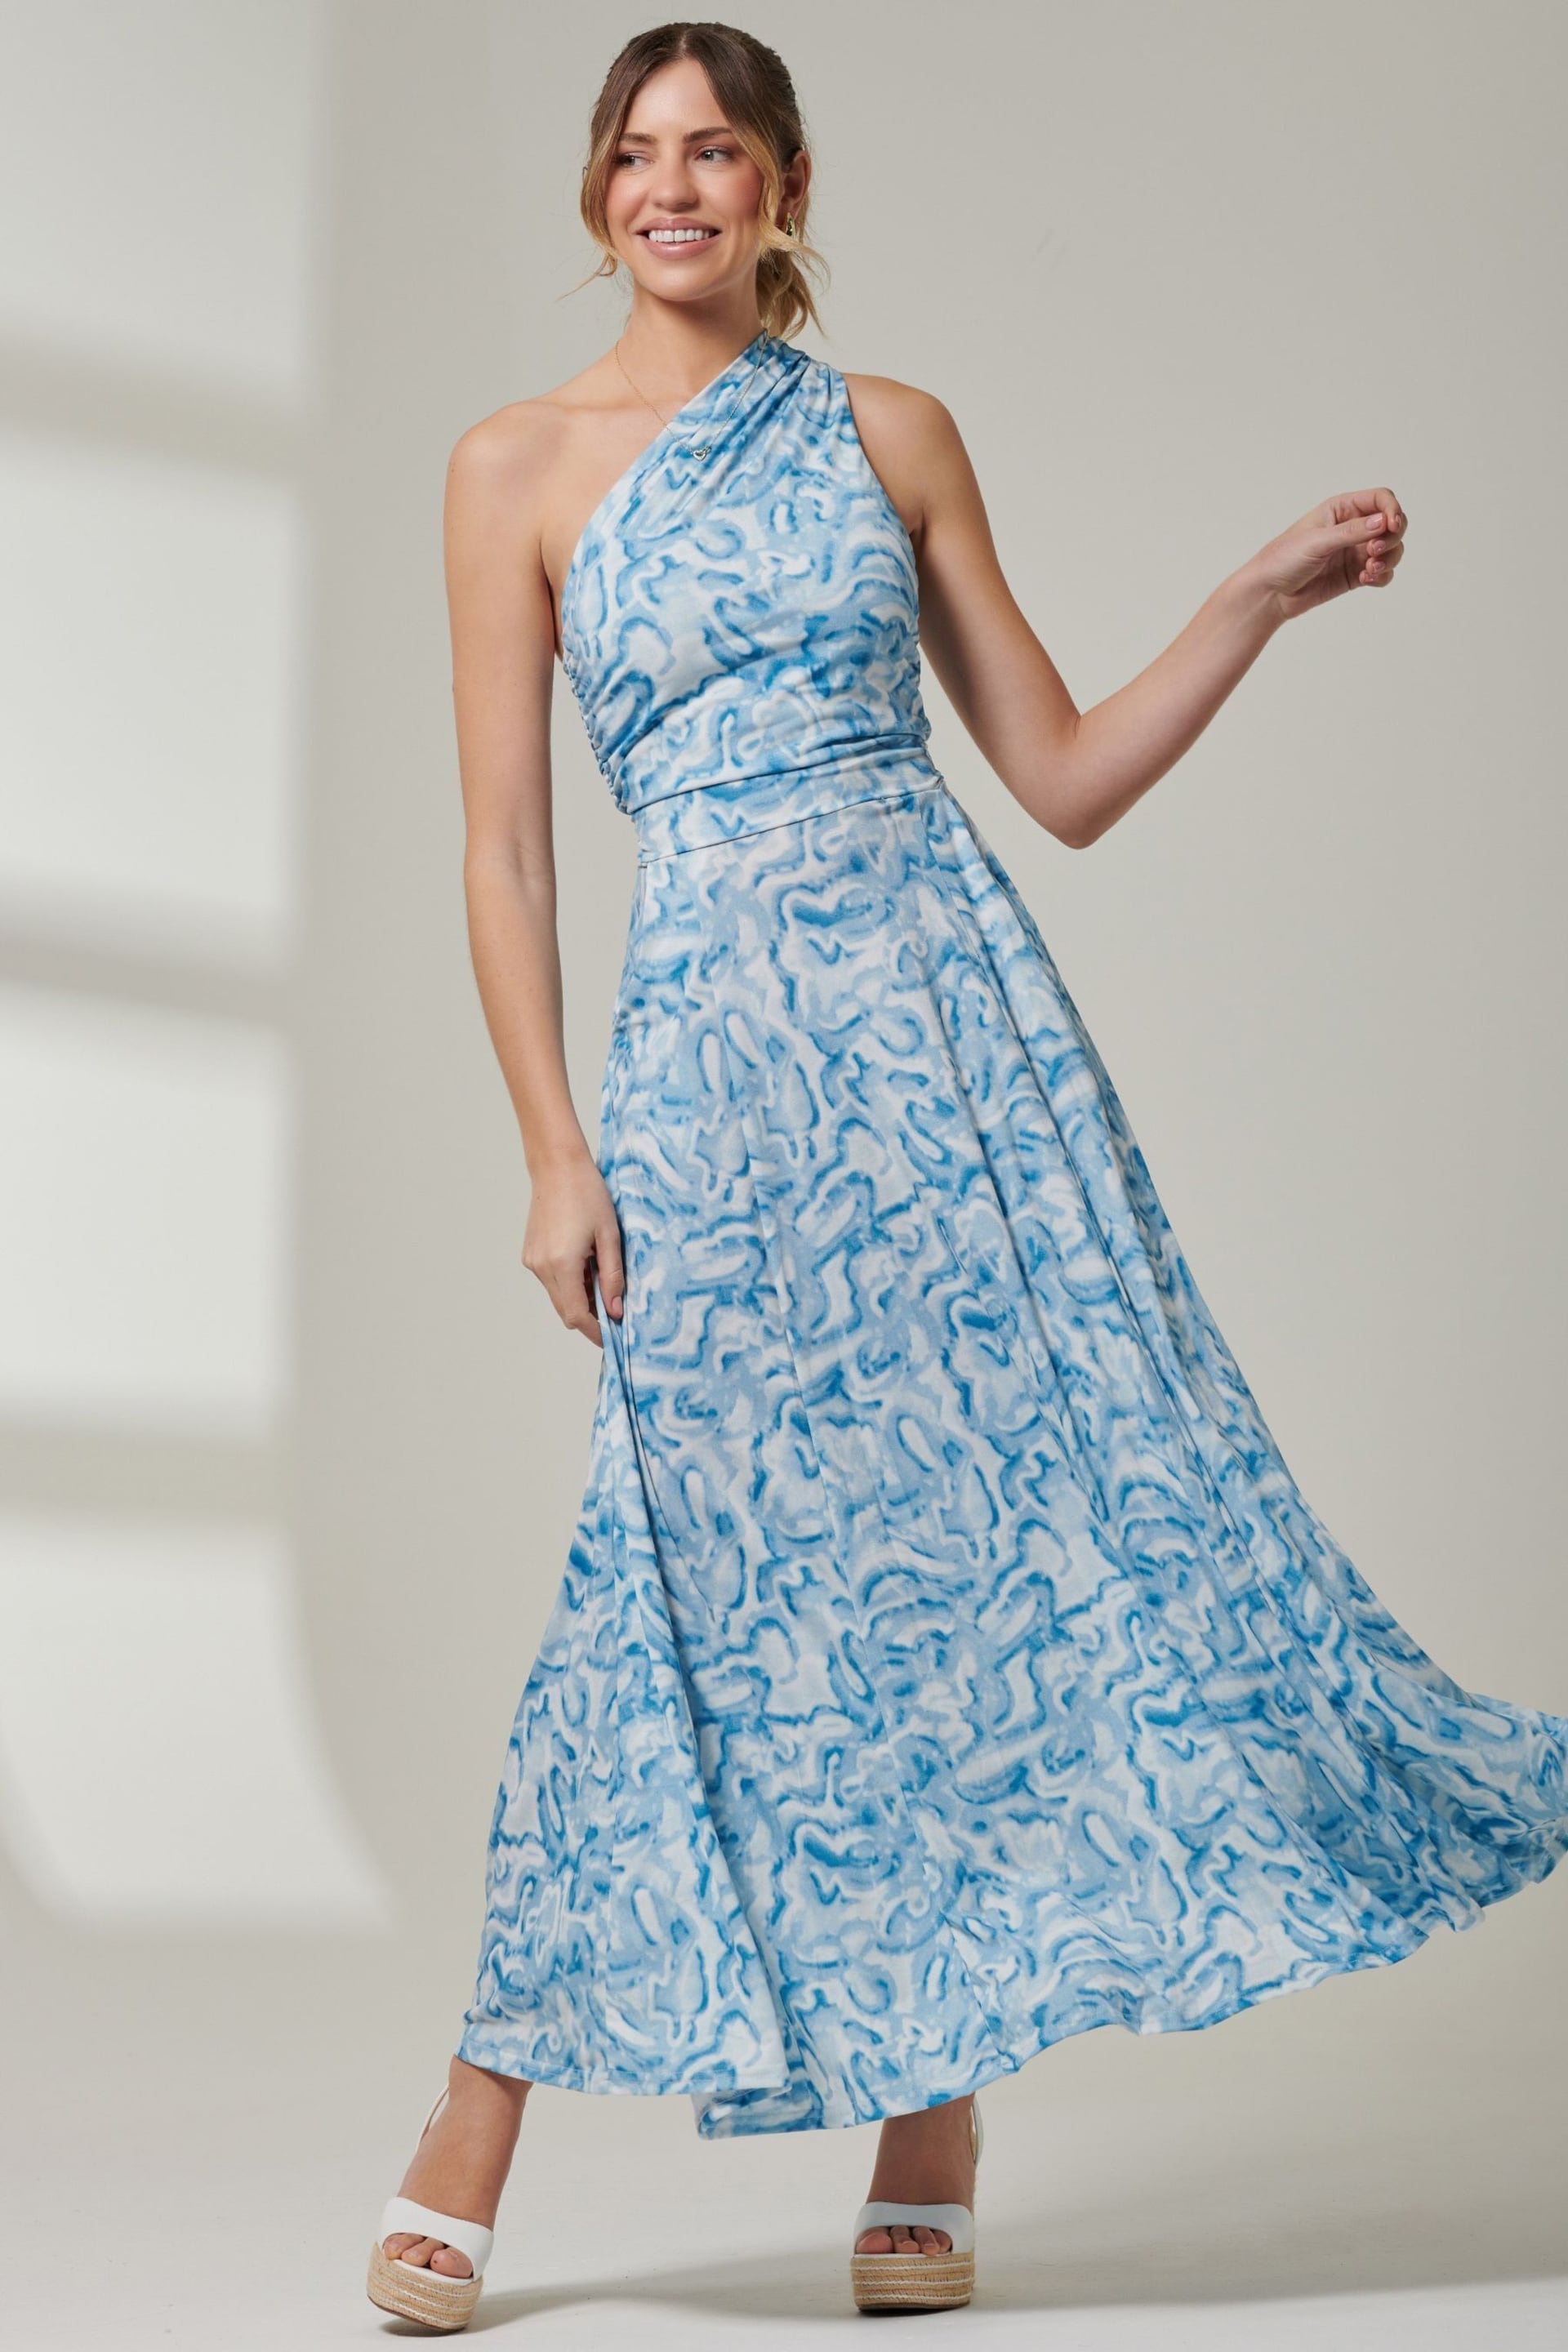 Jolie Moi Blue Abstract Ruched Waist Jersey Maxi Dress - Image 1 of 6